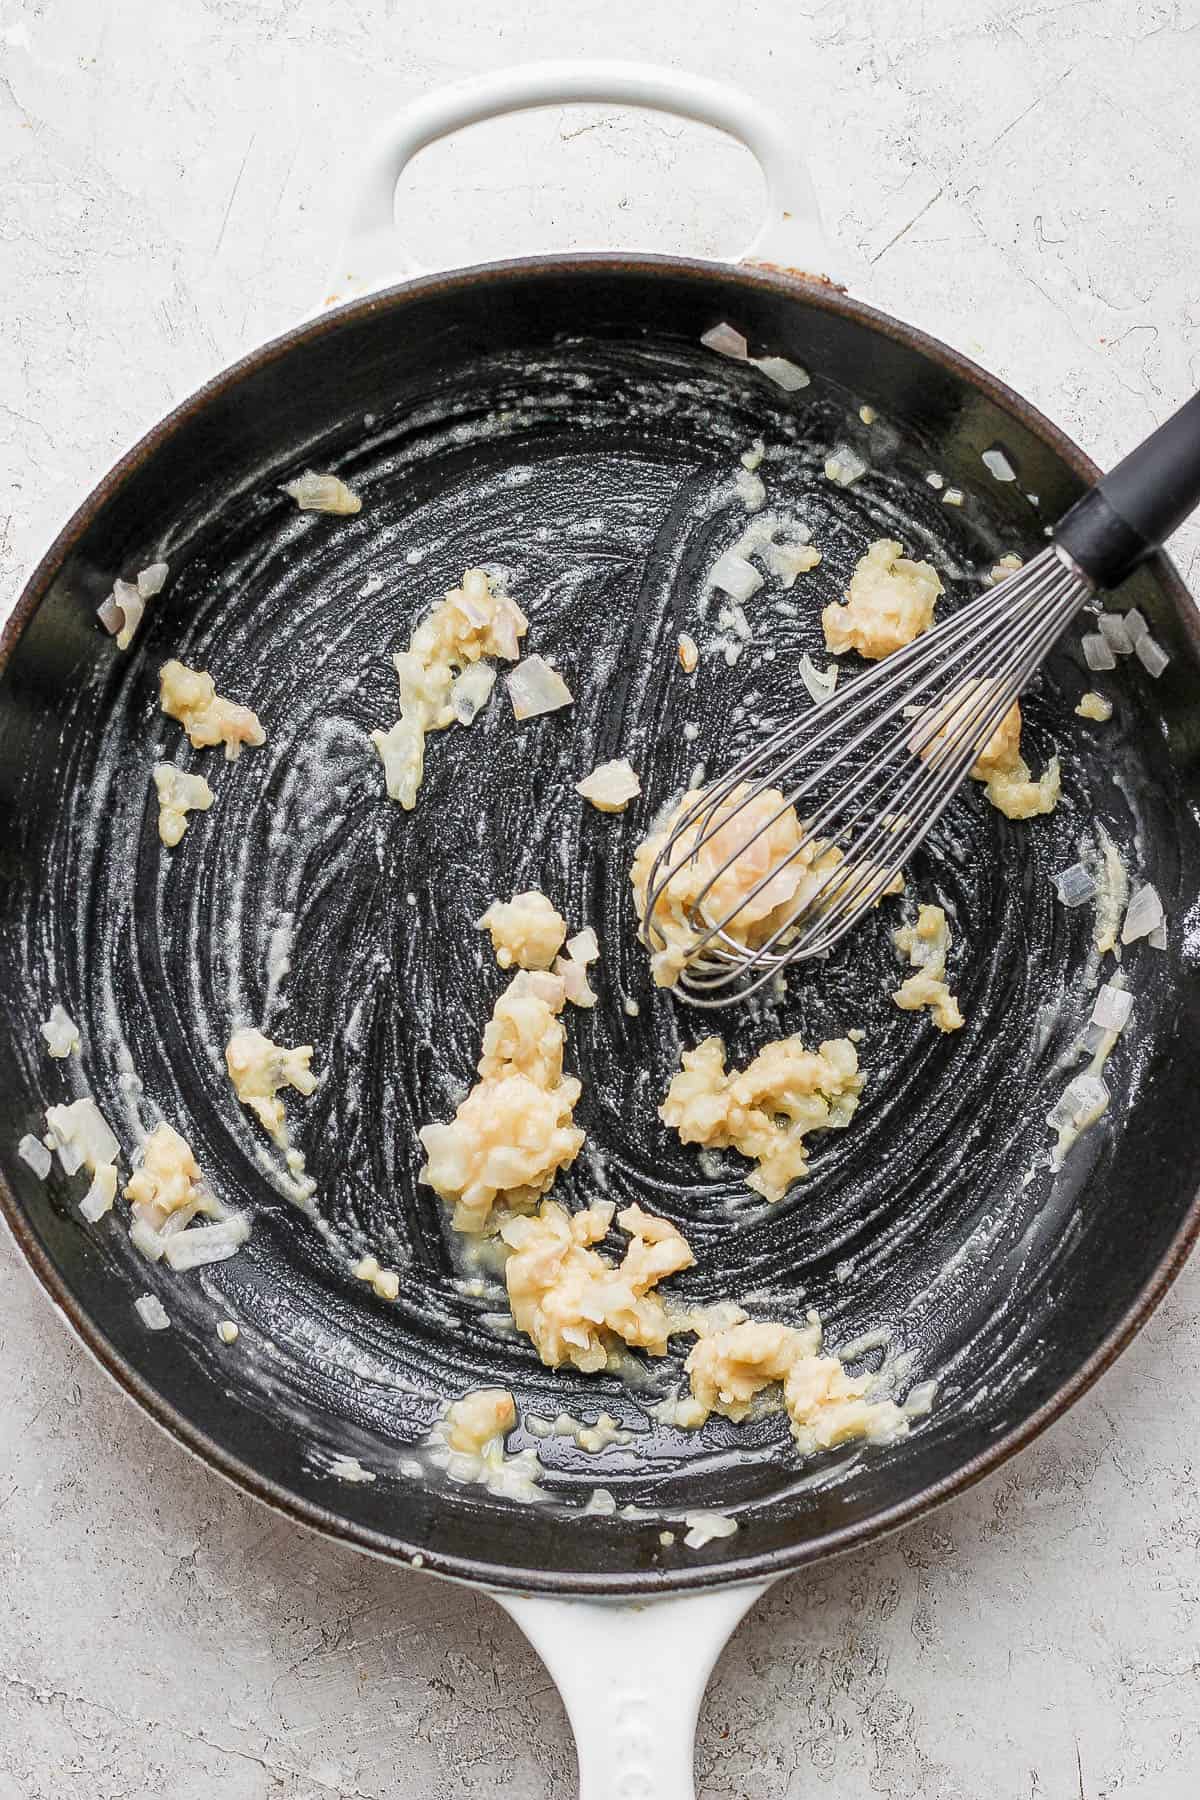 A whisk mixing in flour to the onion, butter, and garlic mixture.